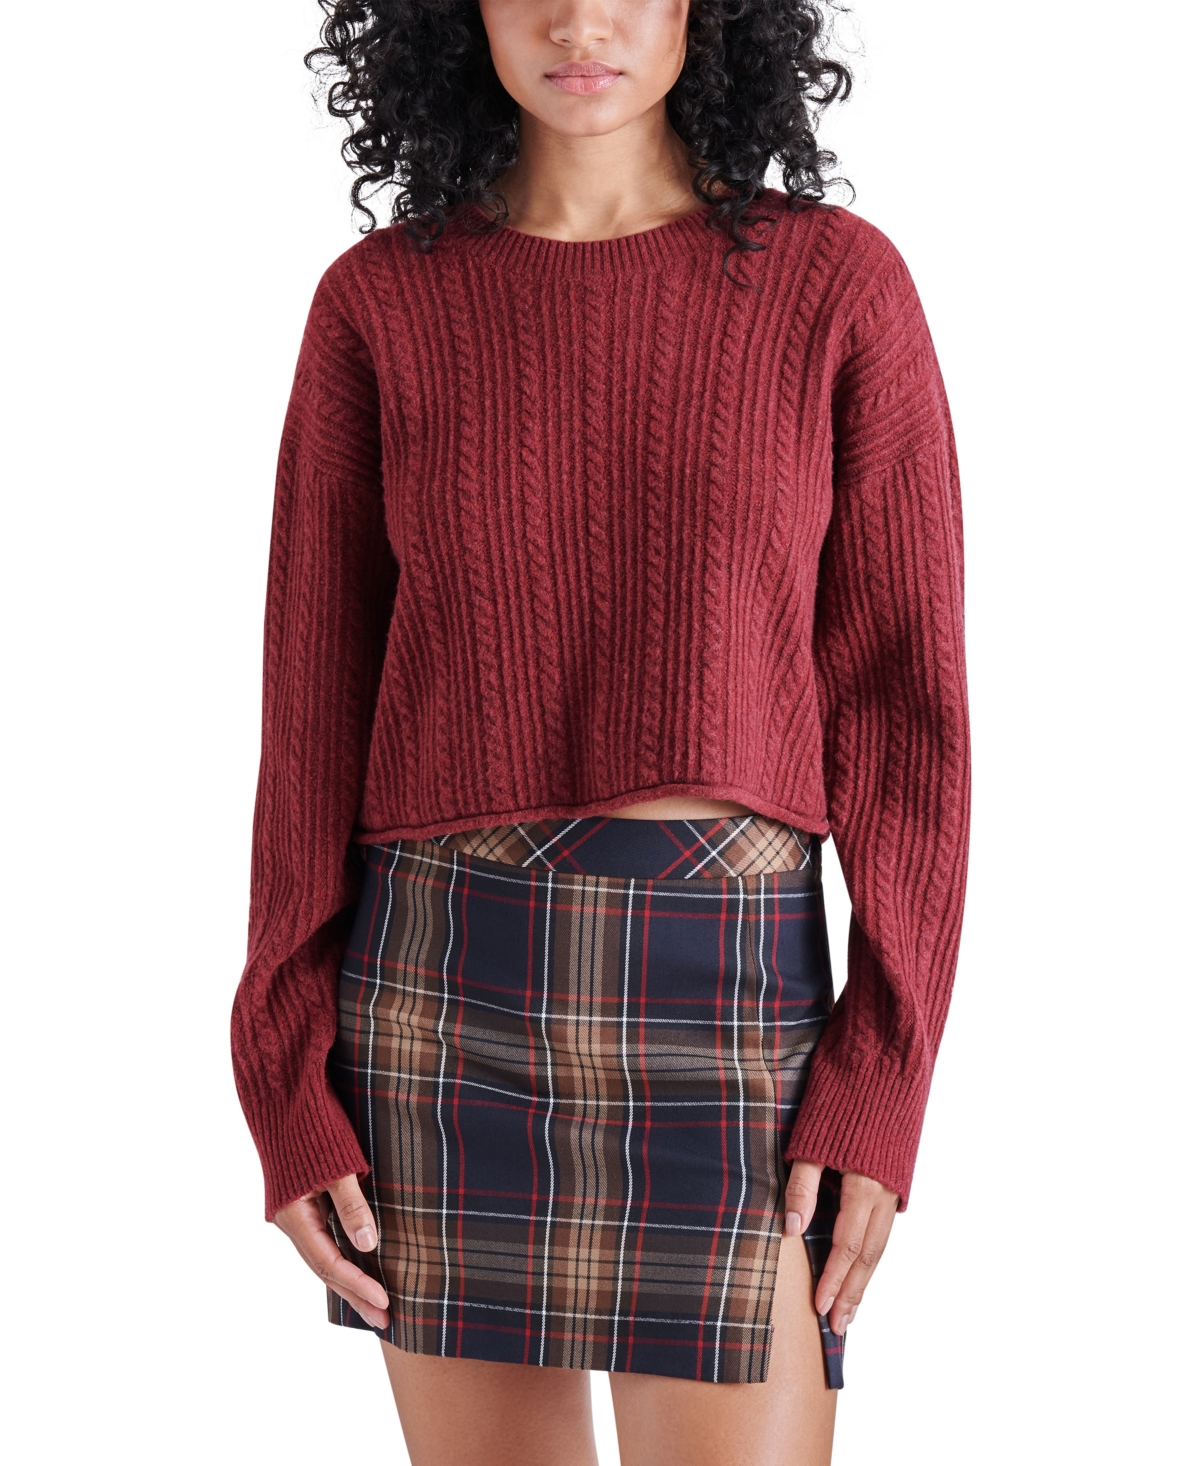 Women's Aerin Cable-Knit Crew Neck Sweater - Dark Red